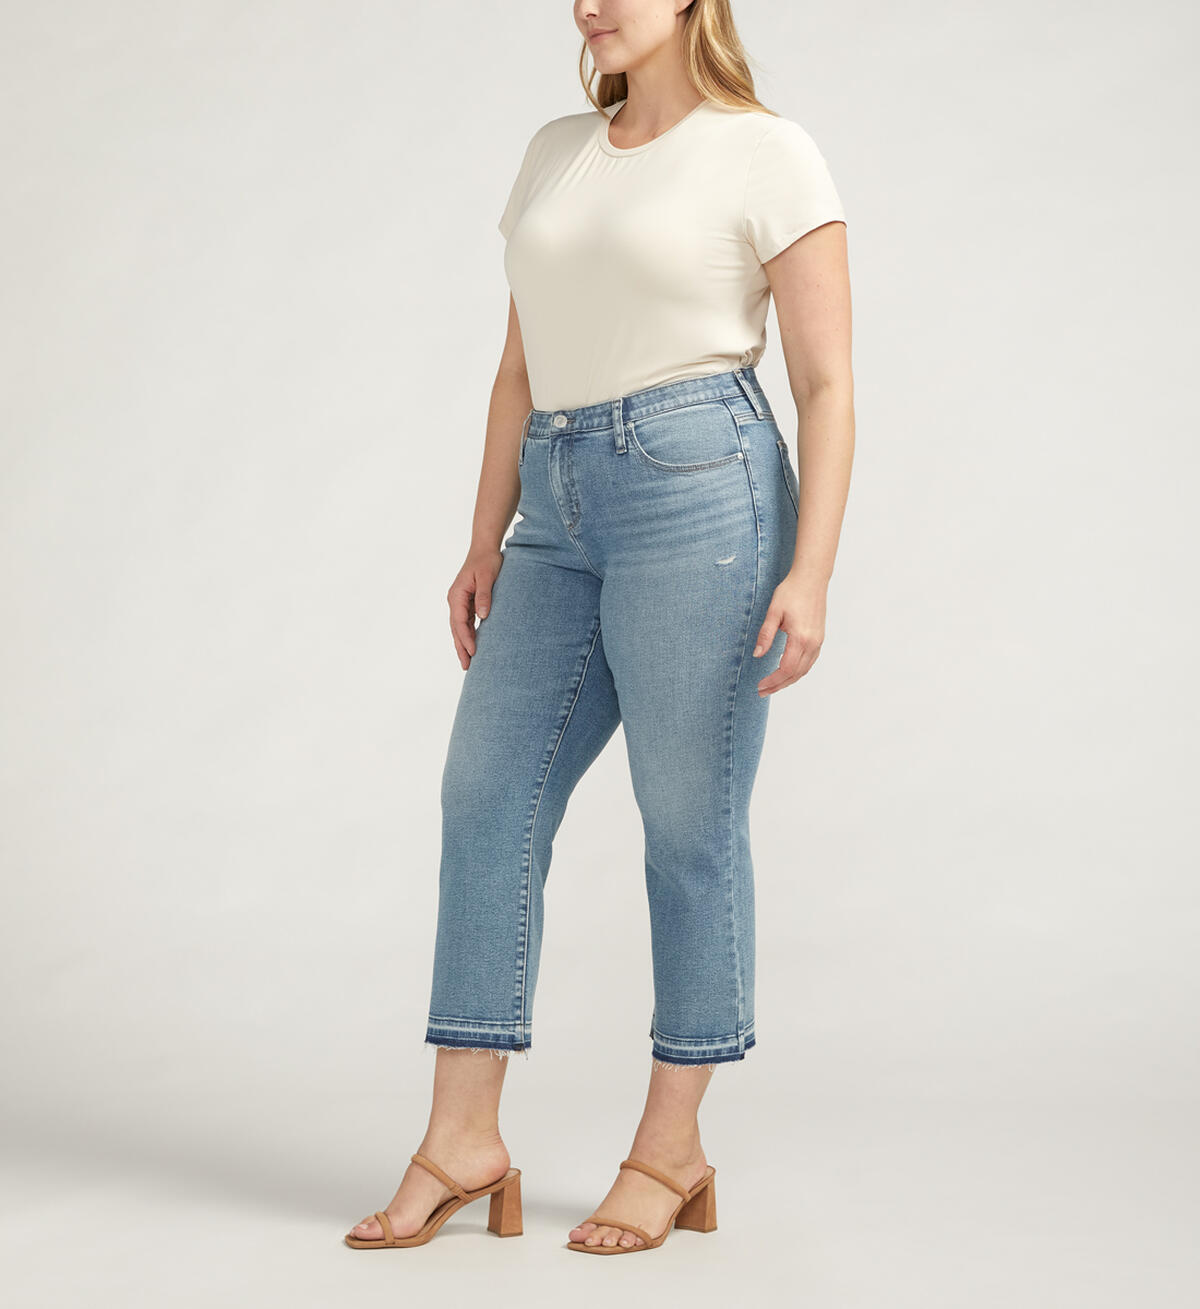 Eloise Mid Rise Cropped Bootcut Jeans Plus Size, , hi-res image number 2